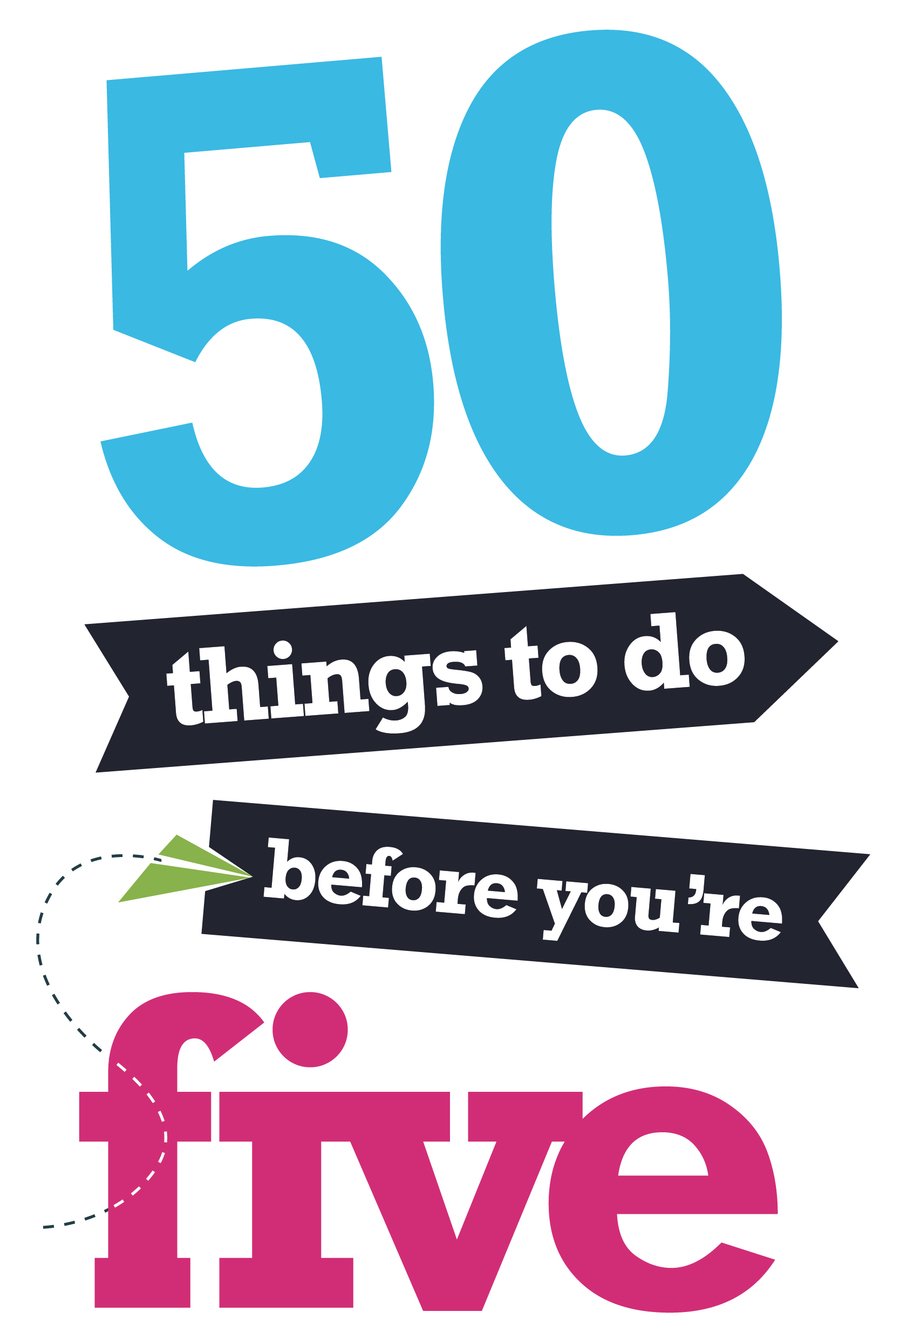 St. Oswald's - 50 things to do before you're 5